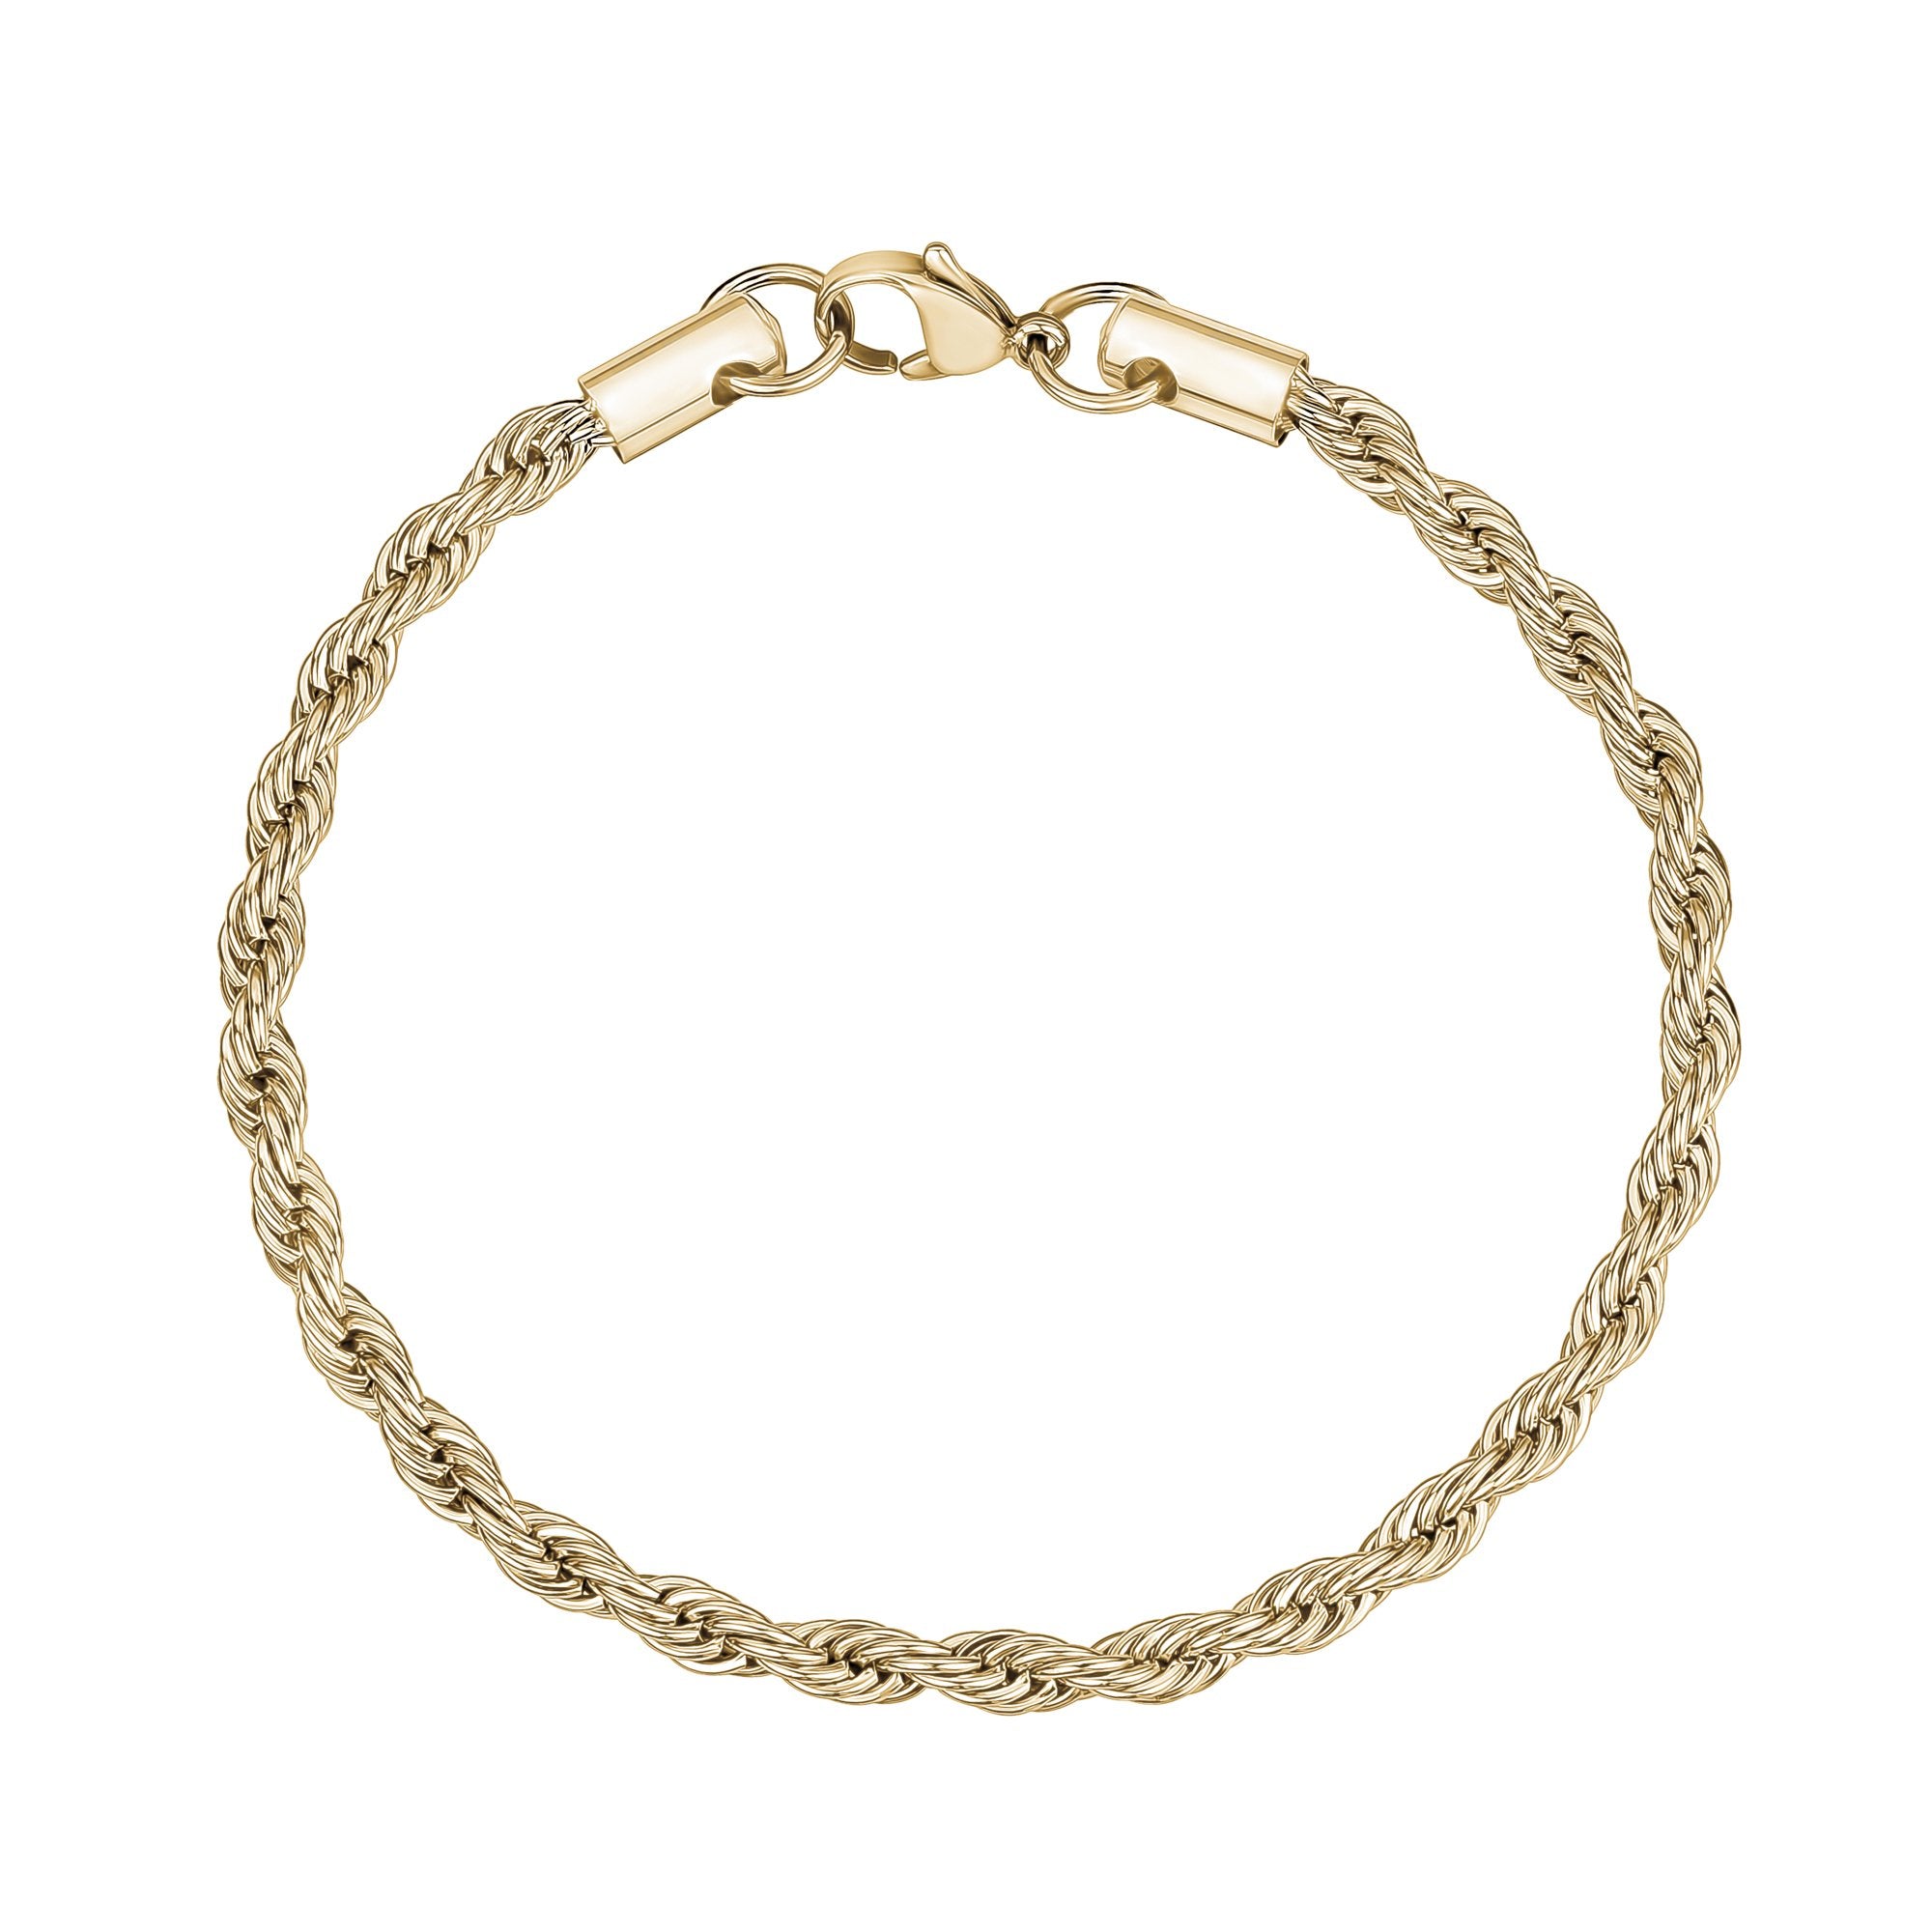 stylish 18k gold plated twisted stainless| Alibaba.com